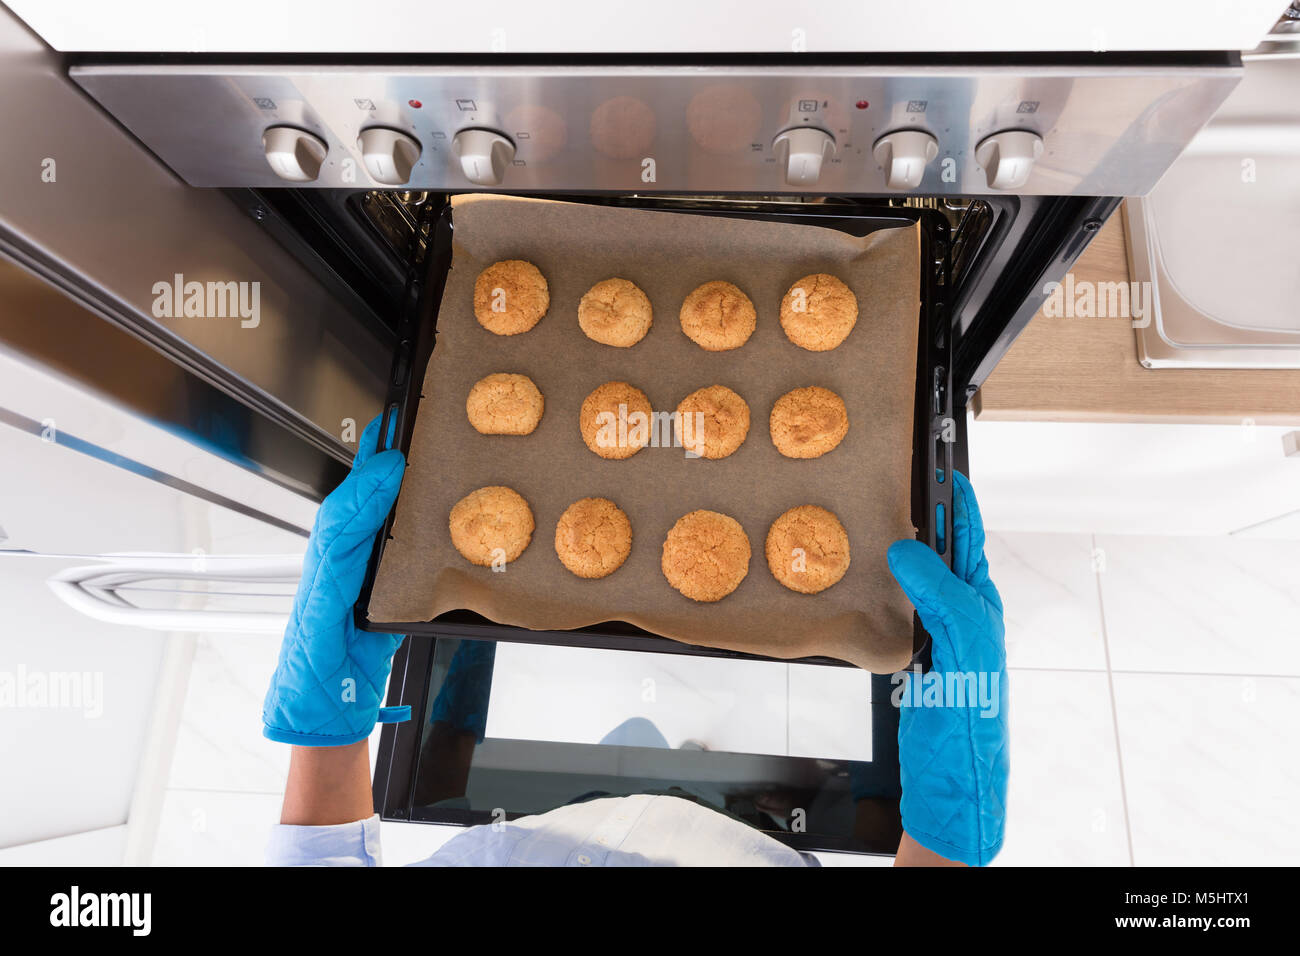 High Angle View Of A Human Hand Taking Out Tray Of Baked Cookies From Oven Stock Photo